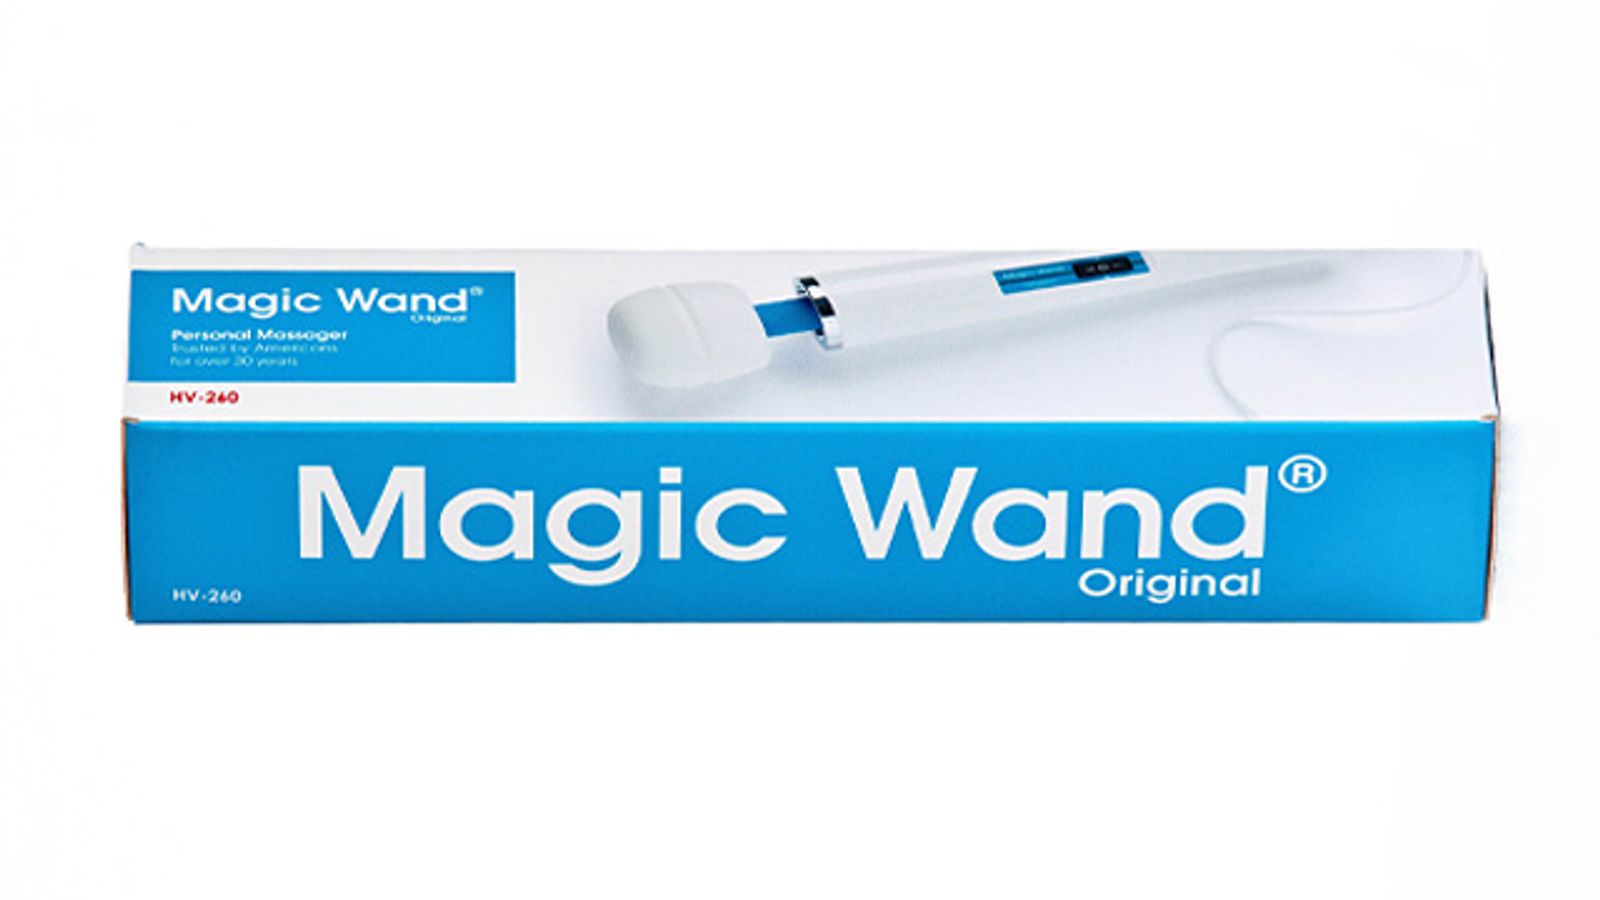 Magic Wand Rebrands With New Look, Website, Packaging